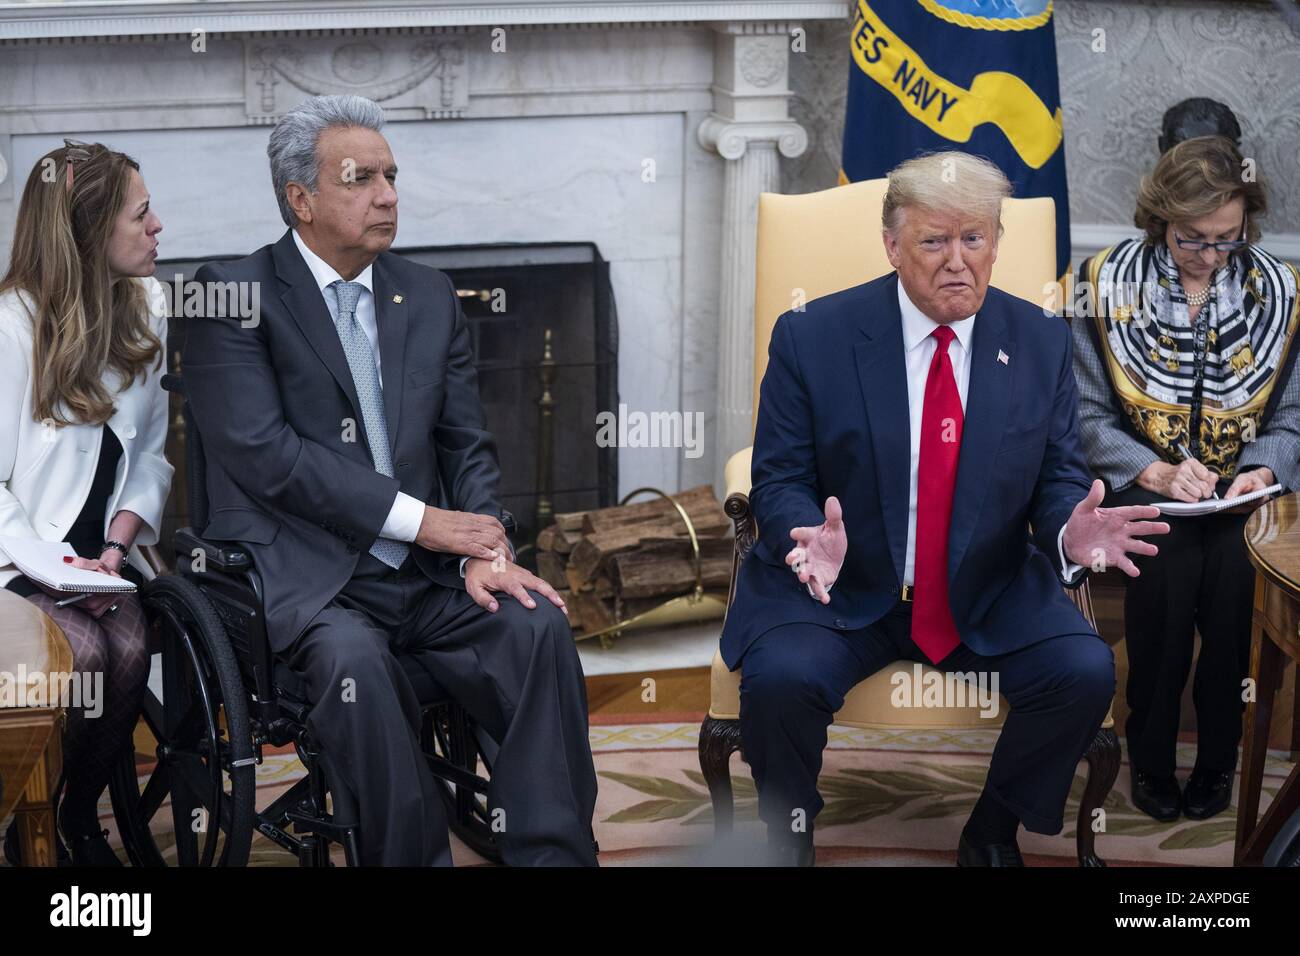 Washington, United States. 12th Feb, 2020. President Donald J. Trump (R) and Ecuadorian President Lenin Moreno (L) speak to the media in the Oval Office of the White House in Washington, DC, on Wednesday, February 12, 2020. The President used the opportunity to double down on his criticism of the sentencing of his supporter Roger Stone, who was convicted obstruction, making false statements, and witness tampering. Photo by Jim Lo Scalzo/UPI Credit: UPI/Alamy Live News Stock Photo